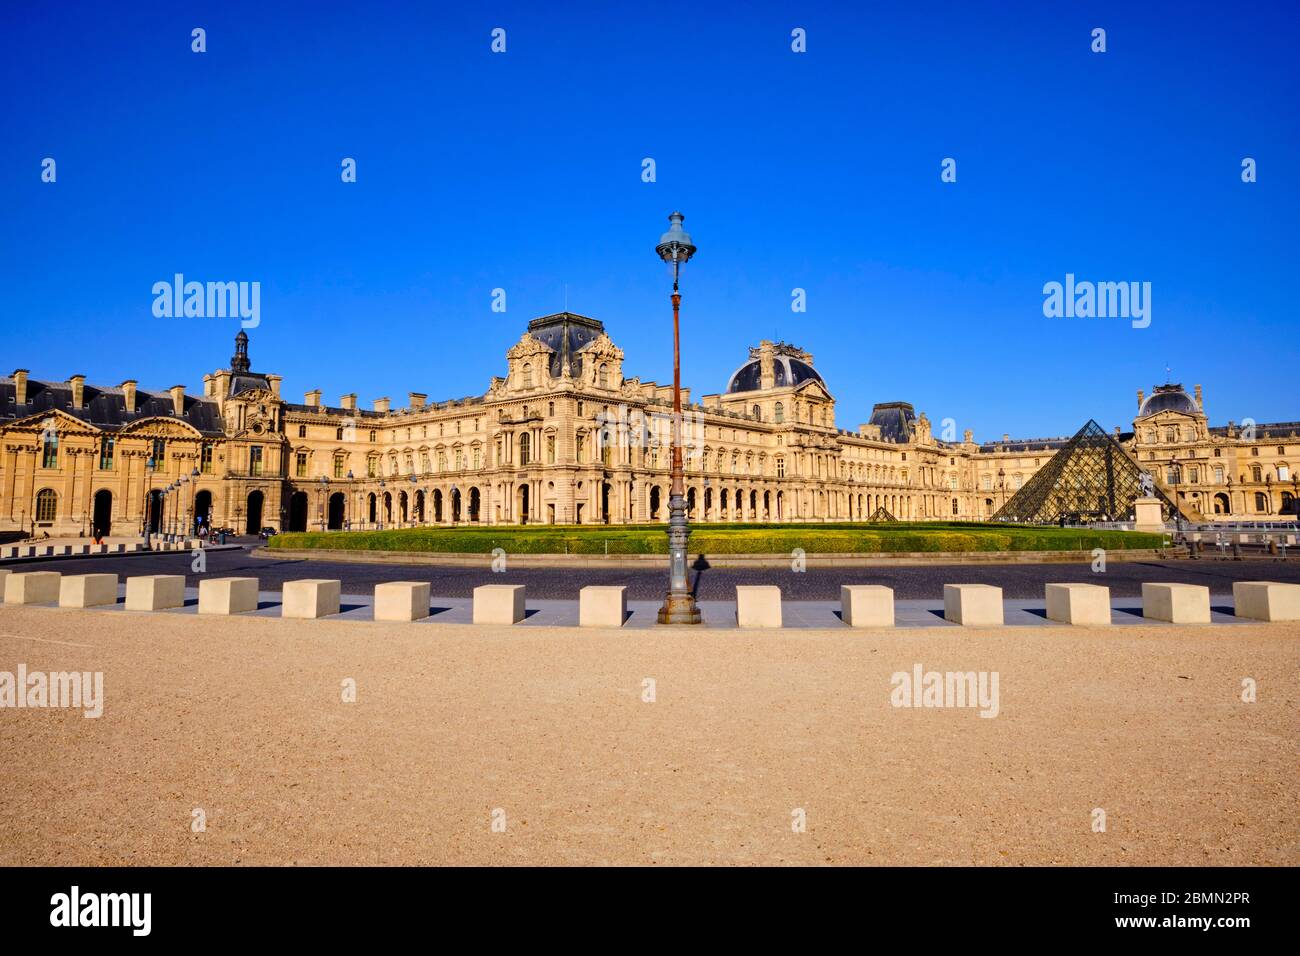 France, Paris, Louvre museum during the lockdown of Covid 19 Stock Photo